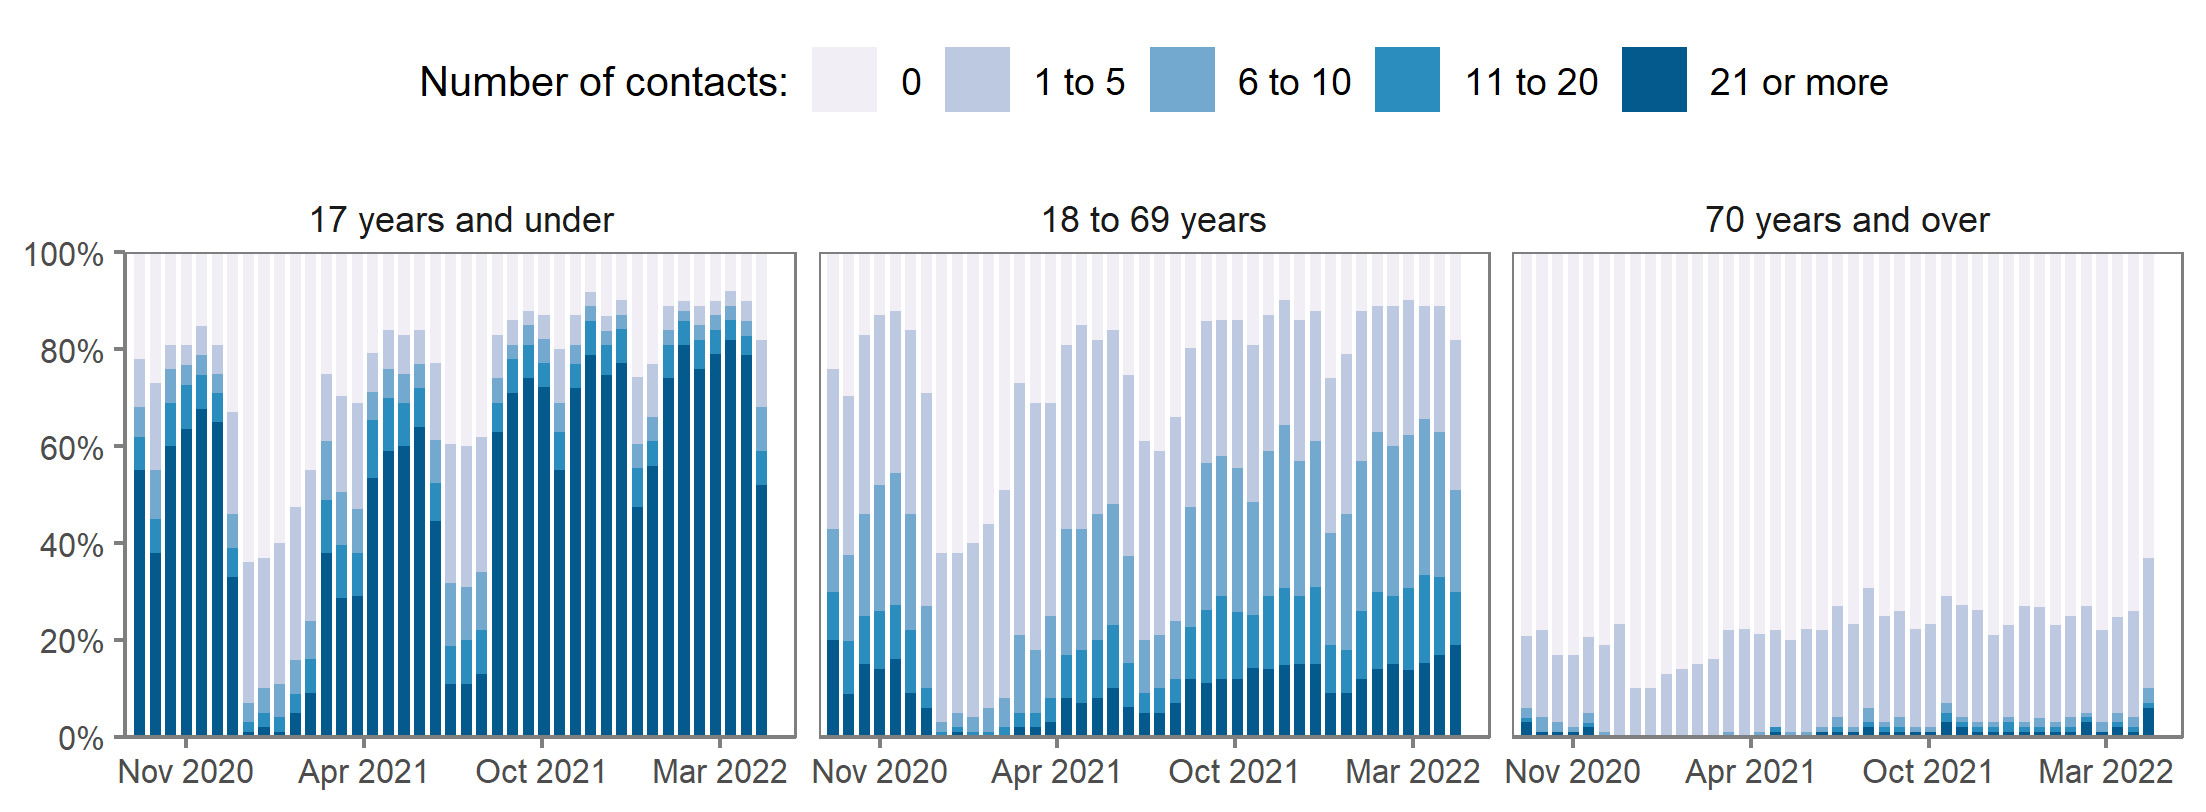 This chart shows the proportions of school-age children reporting each category of number of socially distanced contacts (0, 1 to 5, 6 to 10, 11 to 20, and 21 or more contacts).  Trends in the contacts of children vary over time and are likely to be primarily driven by the timing of school holidays.